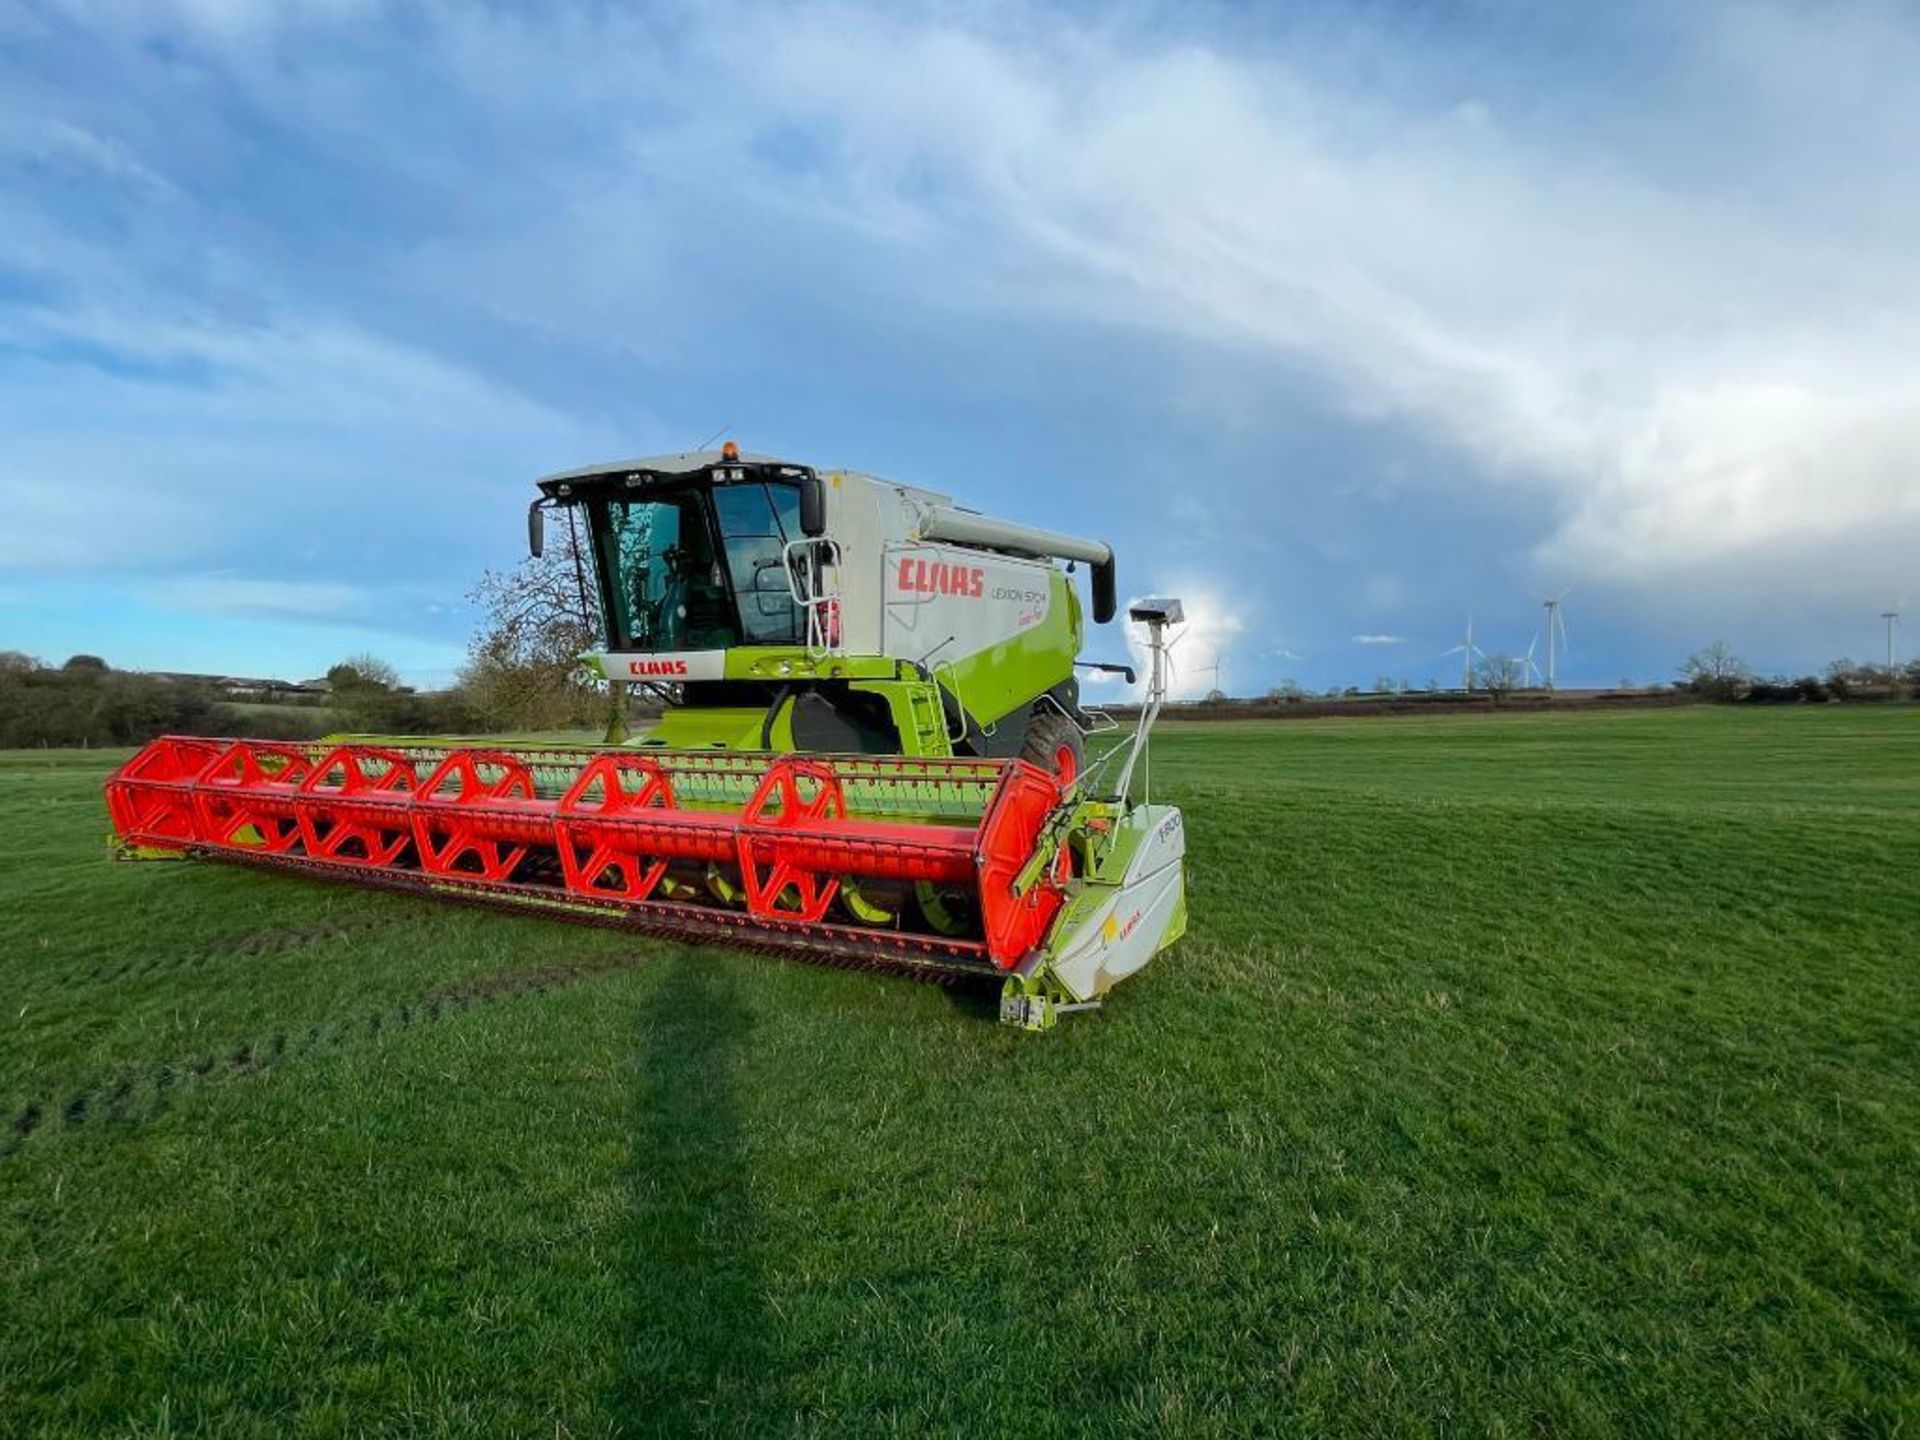 2007 Claas Lexion 570+TT Terra Trac combine harvester with straw chopper and Claas V900 header with - Image 17 of 31